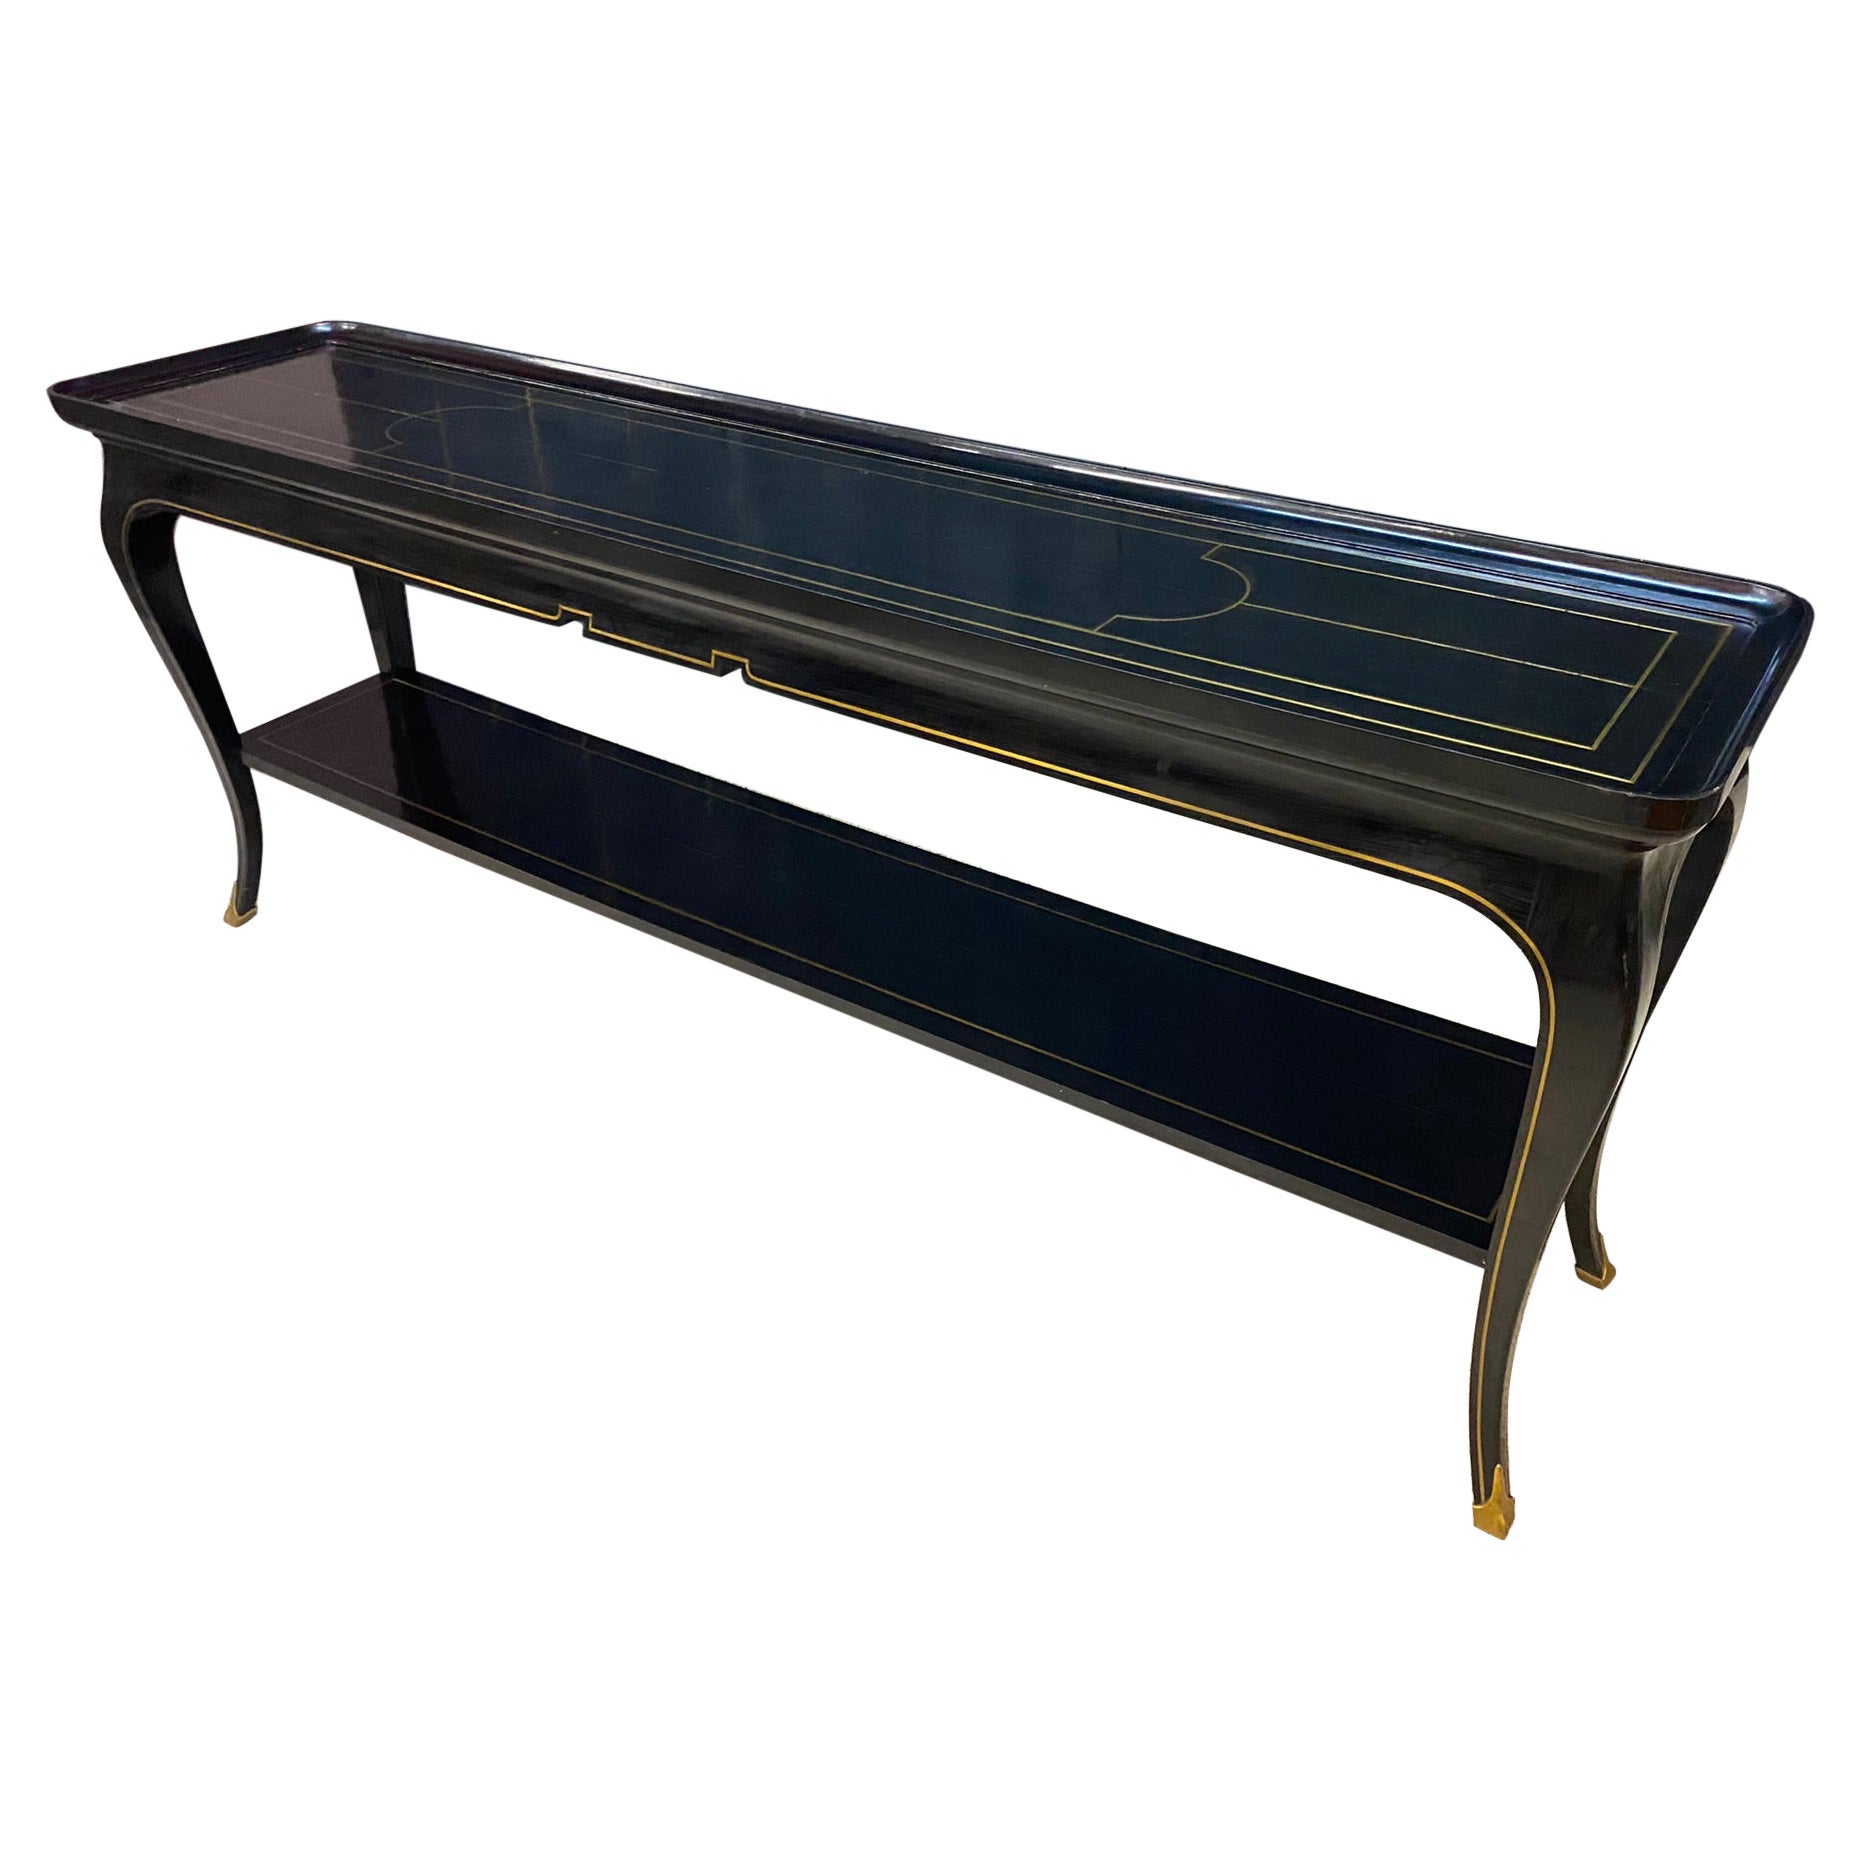 Maison Jansen, Exceptional Large Neo Classic Console Table, circa 1950/1960 For Sale